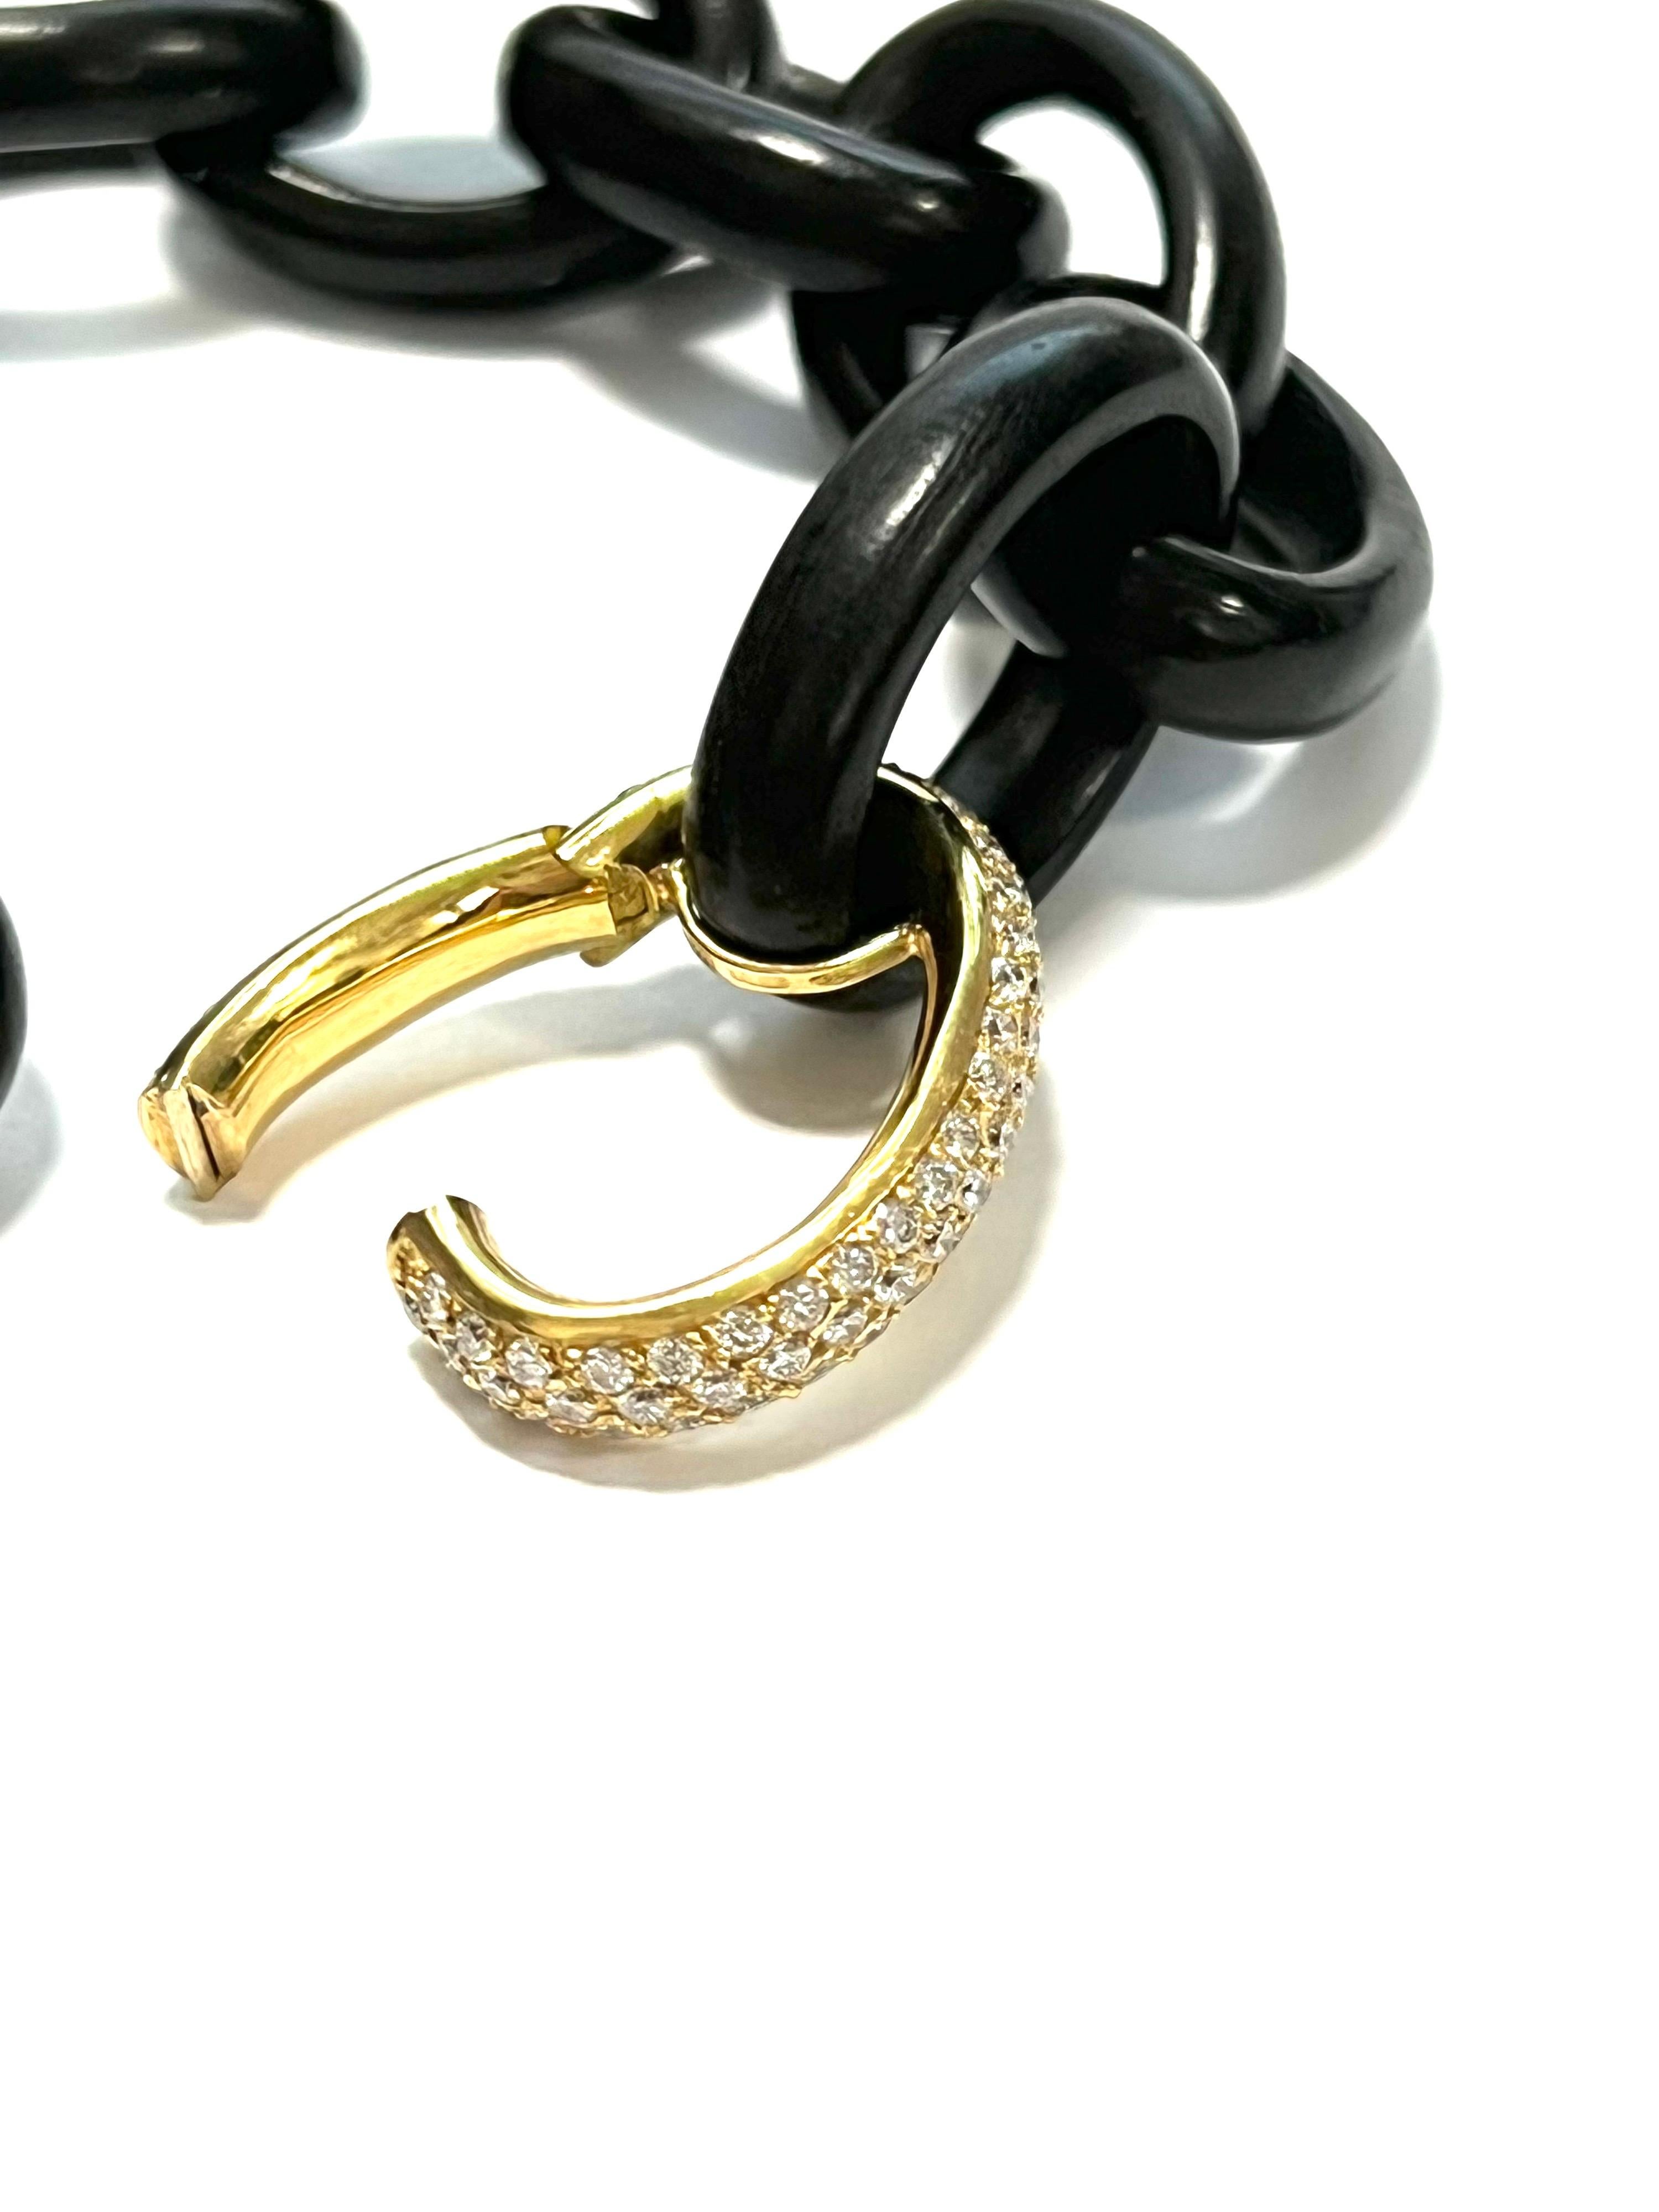 Brilliant Cut Bracelet in Ebony Links with 18k Yellow Gold and Diamond Clasp For Sale